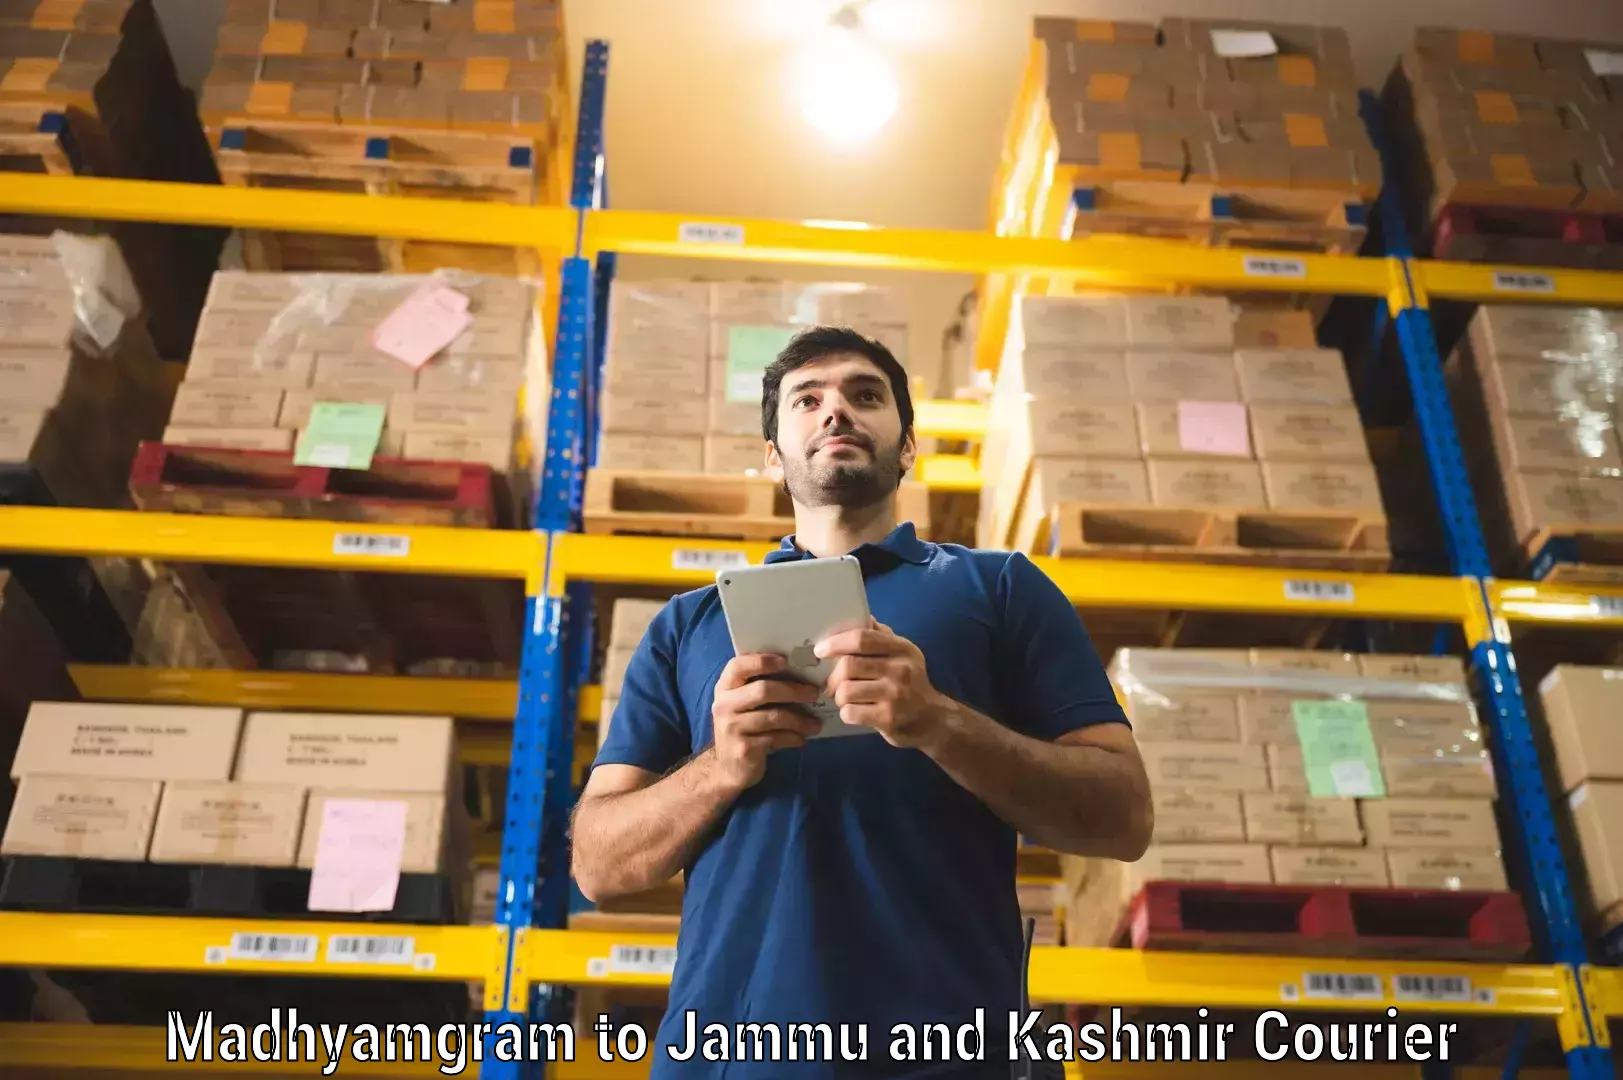 Seamless shipping experience Madhyamgram to Jammu and Kashmir